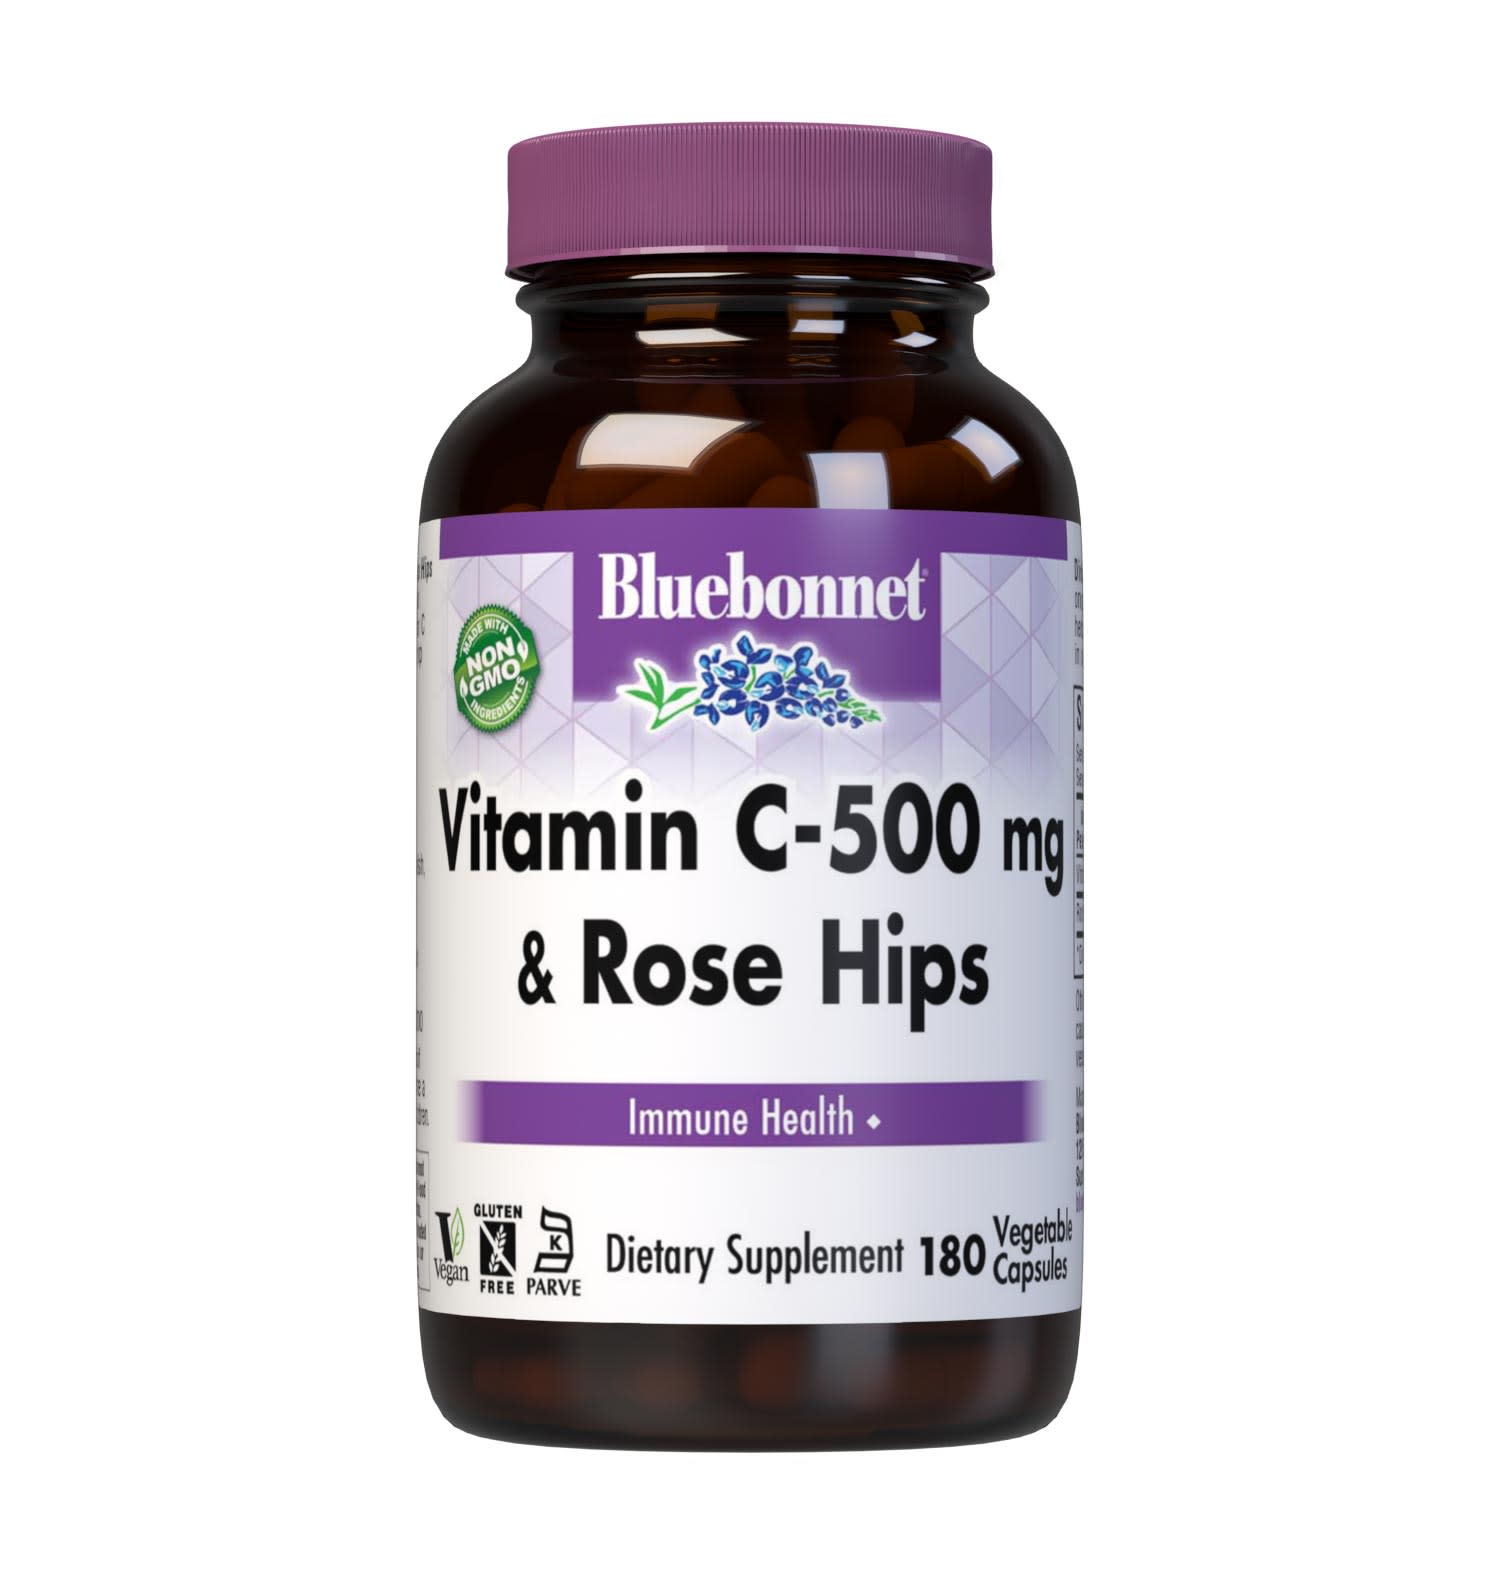 Bluebonnet’s Vitamin C-500 mg & Rose Hips 180 Vegetable Capsules are formulated with non-GMO, identity preserved (IP) vitamin C from L-ascorbic acid and rose hips to help support immune function. #size_180 count